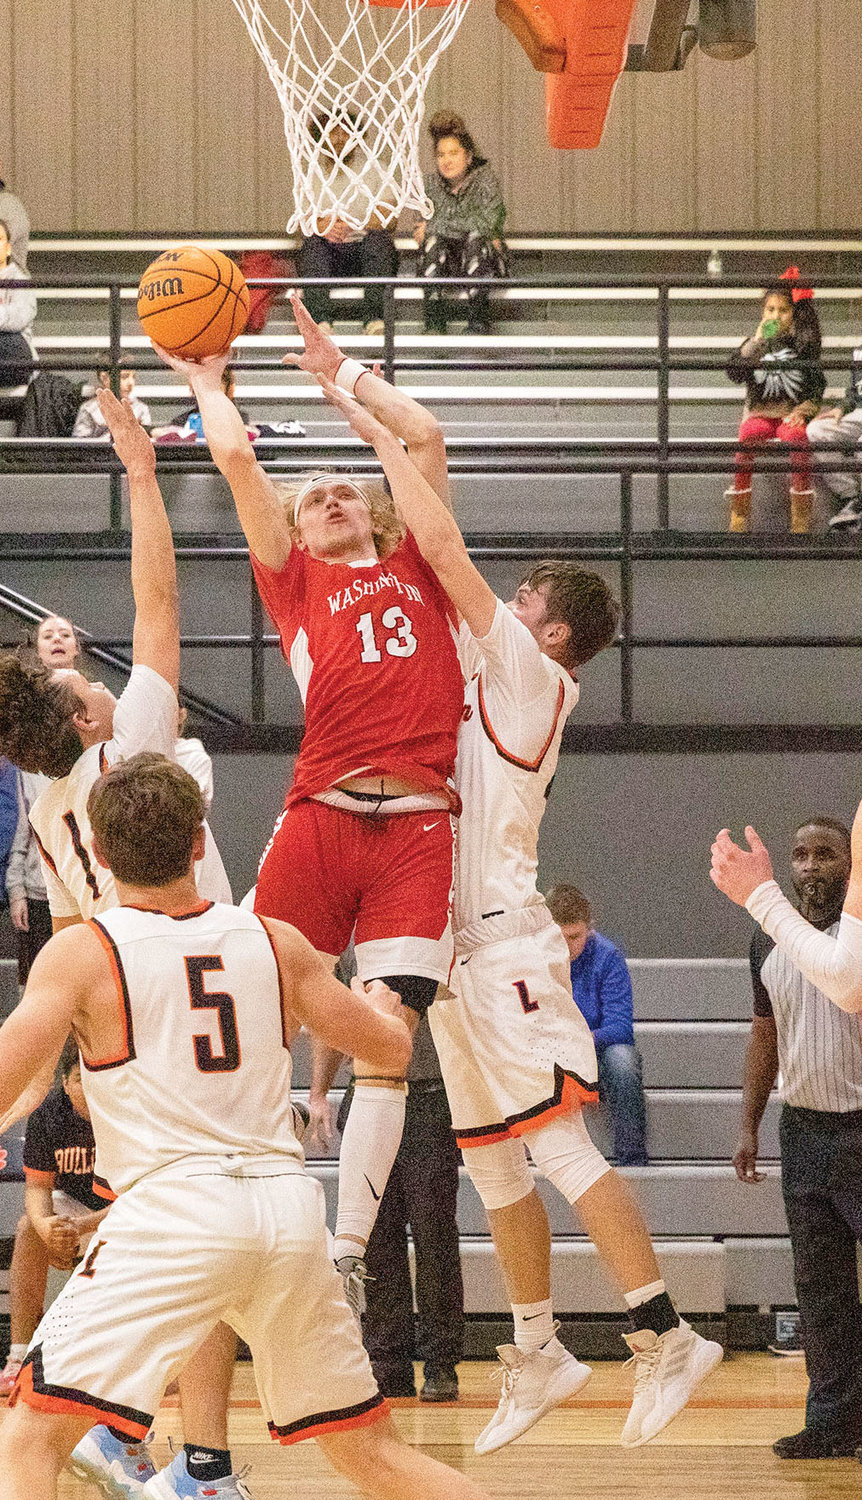 Washington senior Luke Hendrix goes up for two points against Lexington during the Warriors’ 60-47 win. Hendrix scored a team-high 13 points. See story on page 3B.